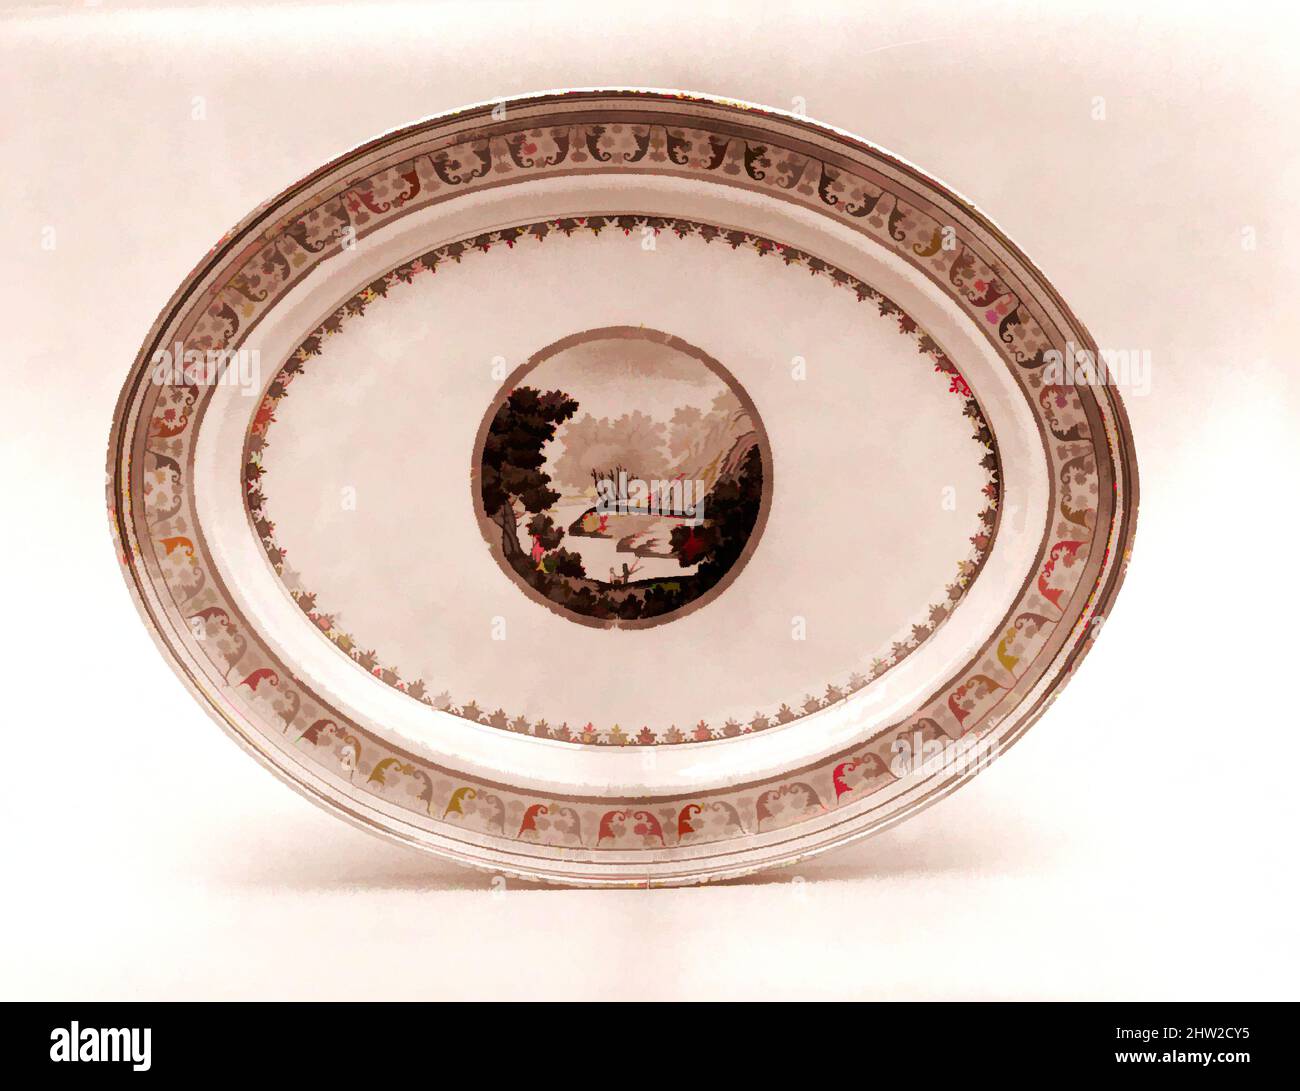 Art inspired by Platter, 1800–1830, Made in China, Chinese, Porcelain, 10 1/8 x 13 1/16 in. (25.7 x 33.2 cm), Ceramics, Classic works modernized by Artotop with a splash of modernity. Shapes, color and value, eye-catching visual impact on art. Emotions through freedom of artworks in a contemporary way. A timeless message pursuing a wildly creative new direction. Artists turning to the digital medium and creating the Artotop NFT Stock Photo